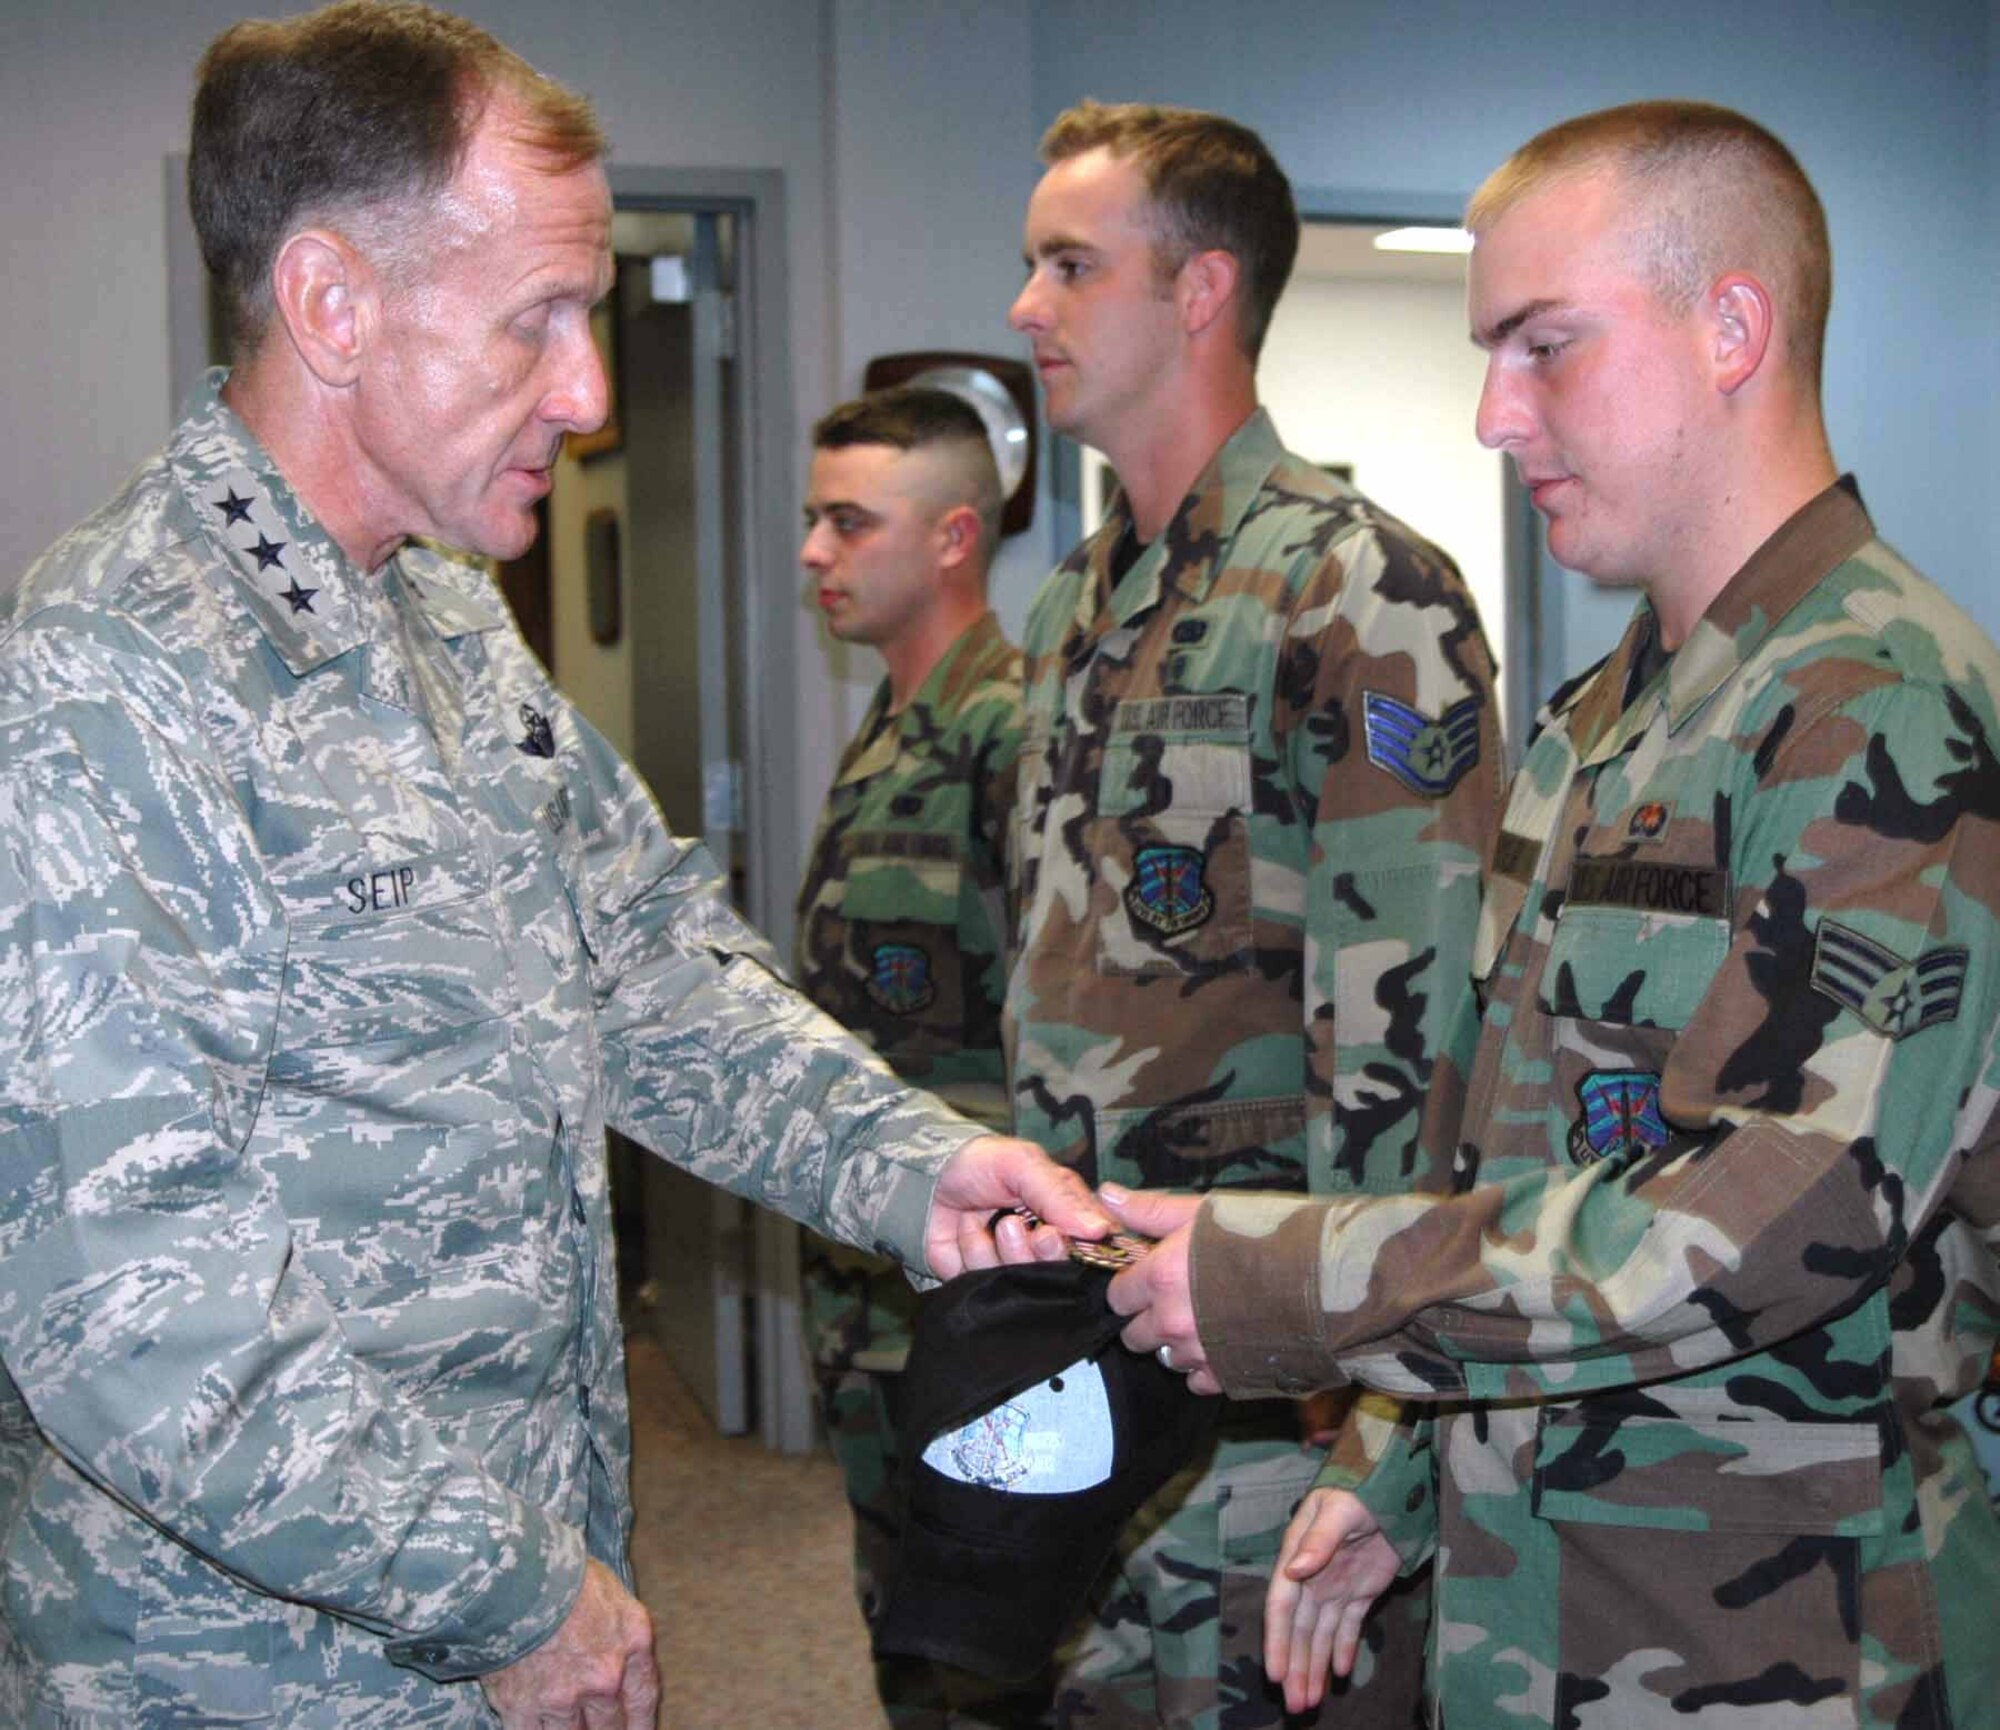 Lt. Gen. Norman Seip, 12th Air Force and Air Forces Southern commander, presents Senior Airman Travis Meyer of the 32nd Combat Communications Squadron with a coin prior to a briefing with 3rd Combat Communications Group Commander Col. James Appleyard during his Sept. 14 visit. (Air Force photo by Darren D. Heusel)